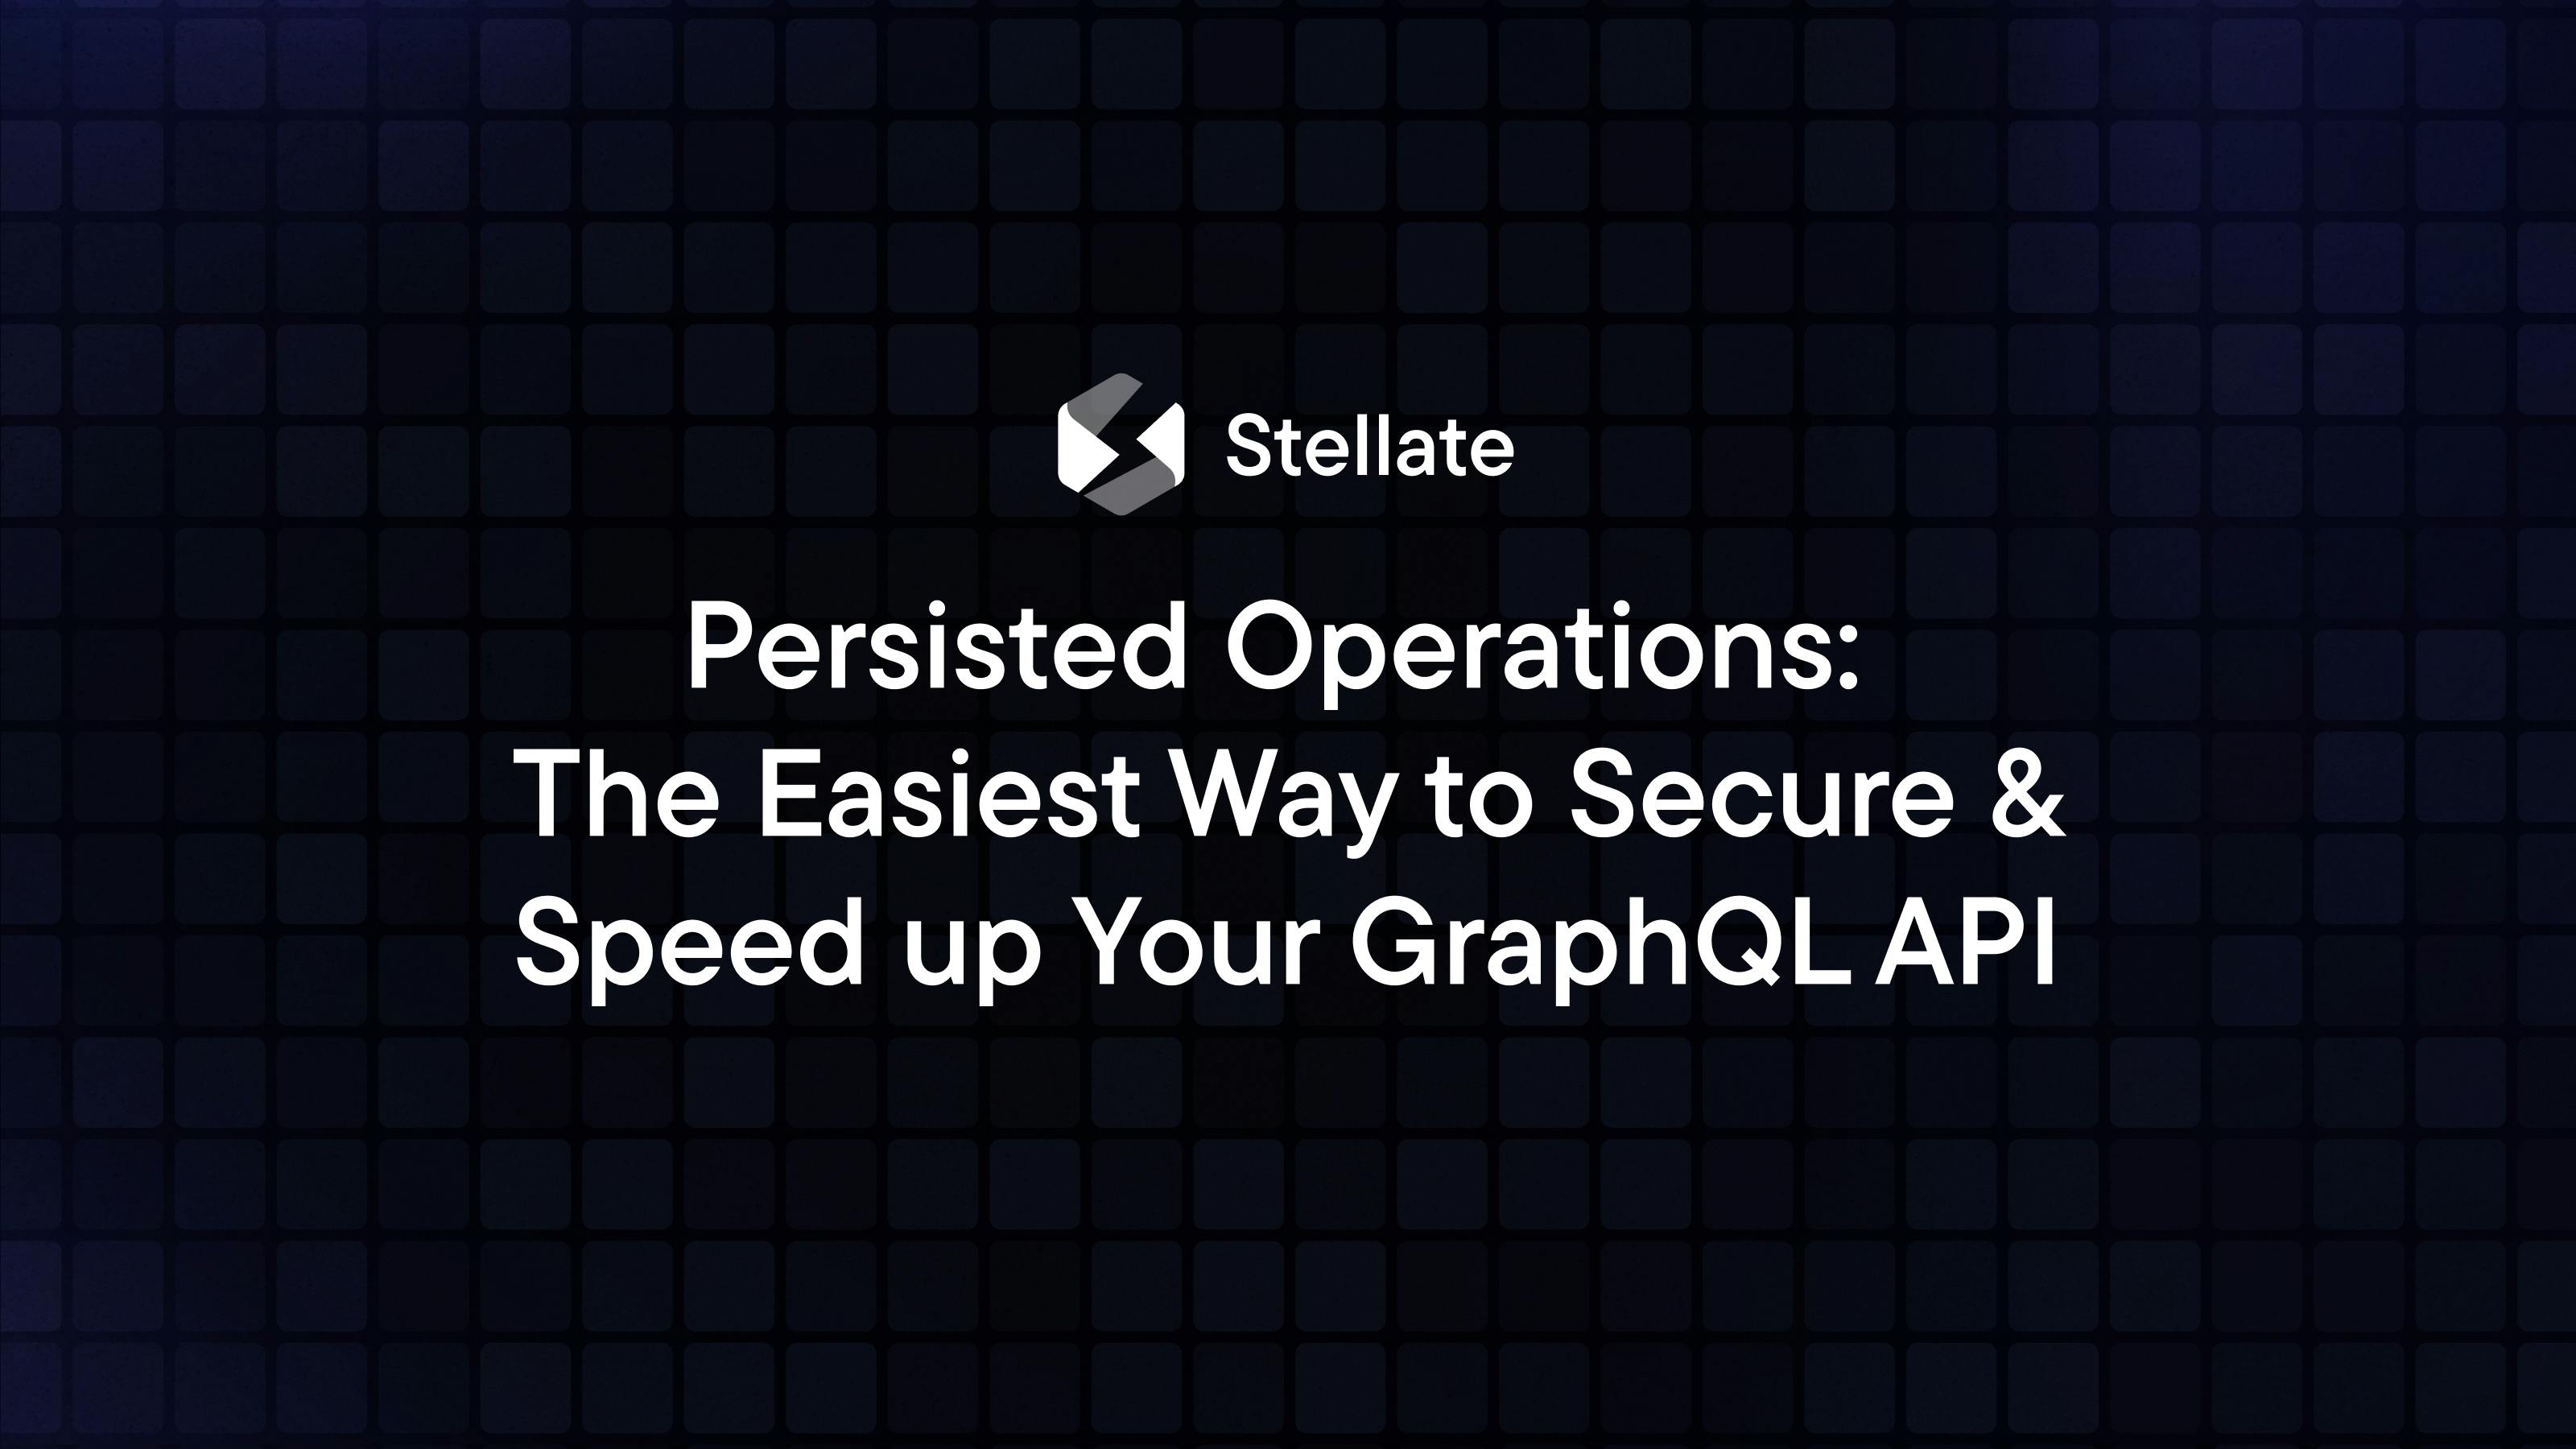 Persisted Operations: The Easiest Way to Secure & Speed up Your GraphQL API